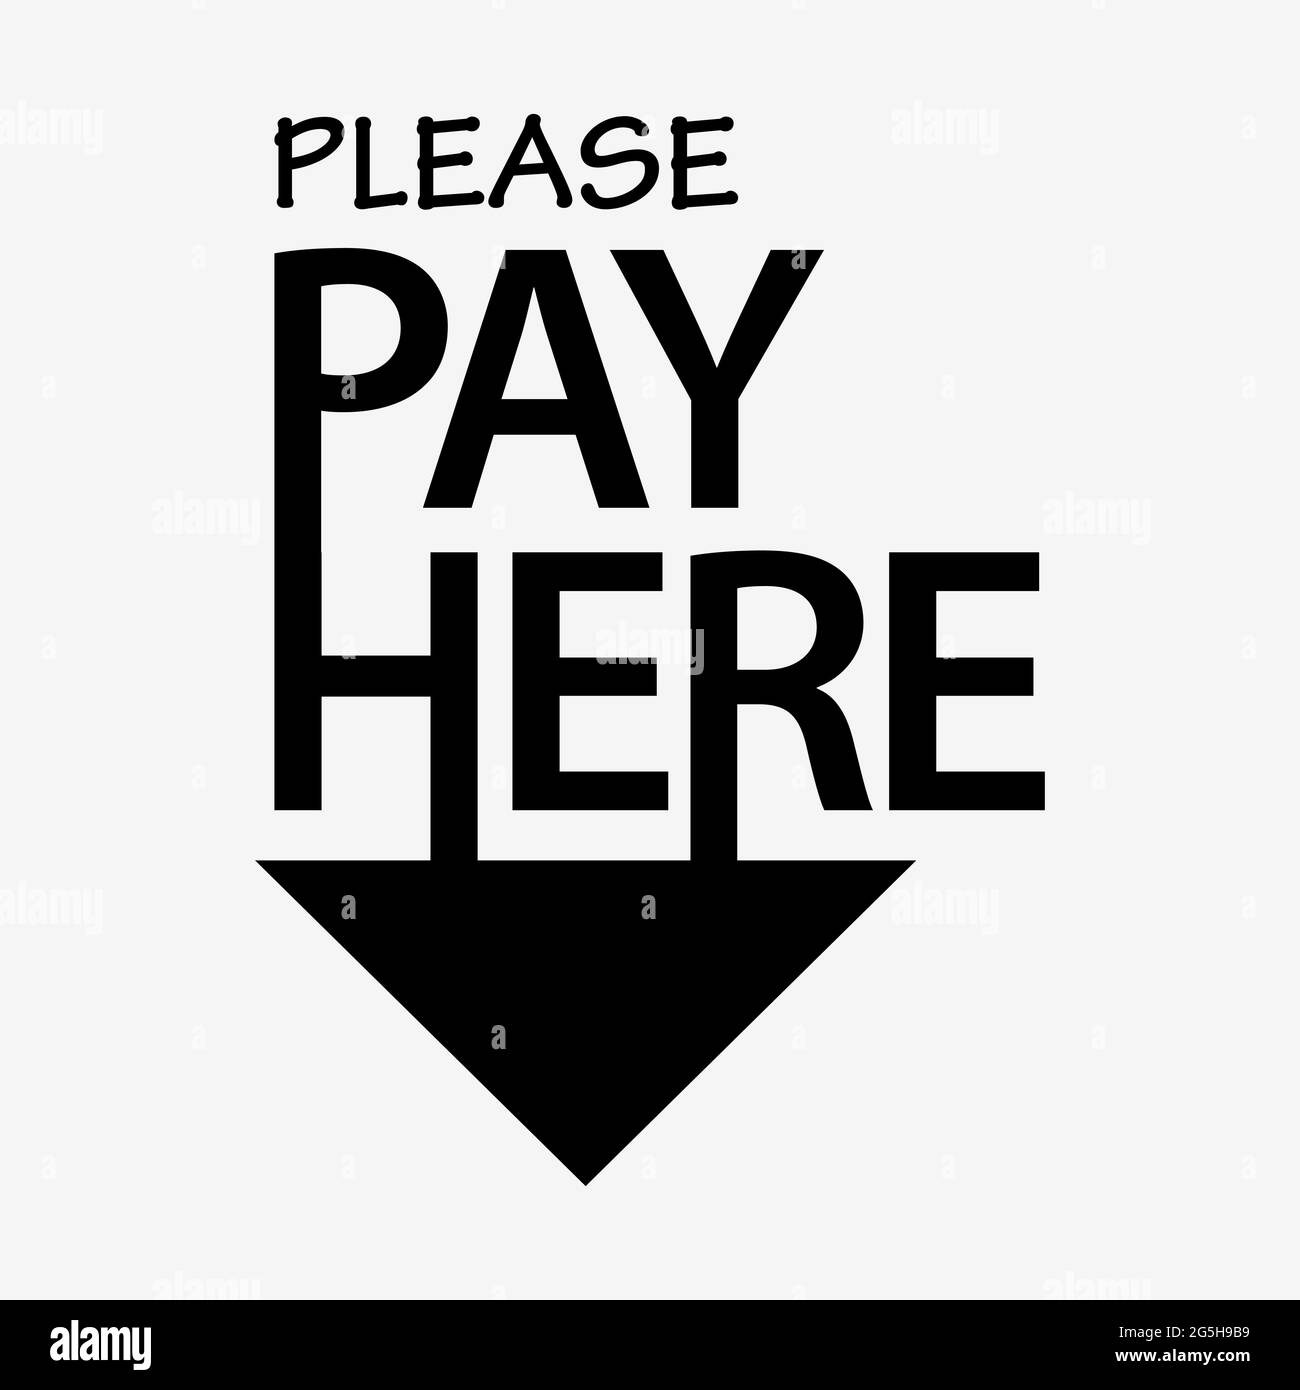 Please Pay Here with down arrow. Flat design. Vector Illustration on white background. Stock Vector